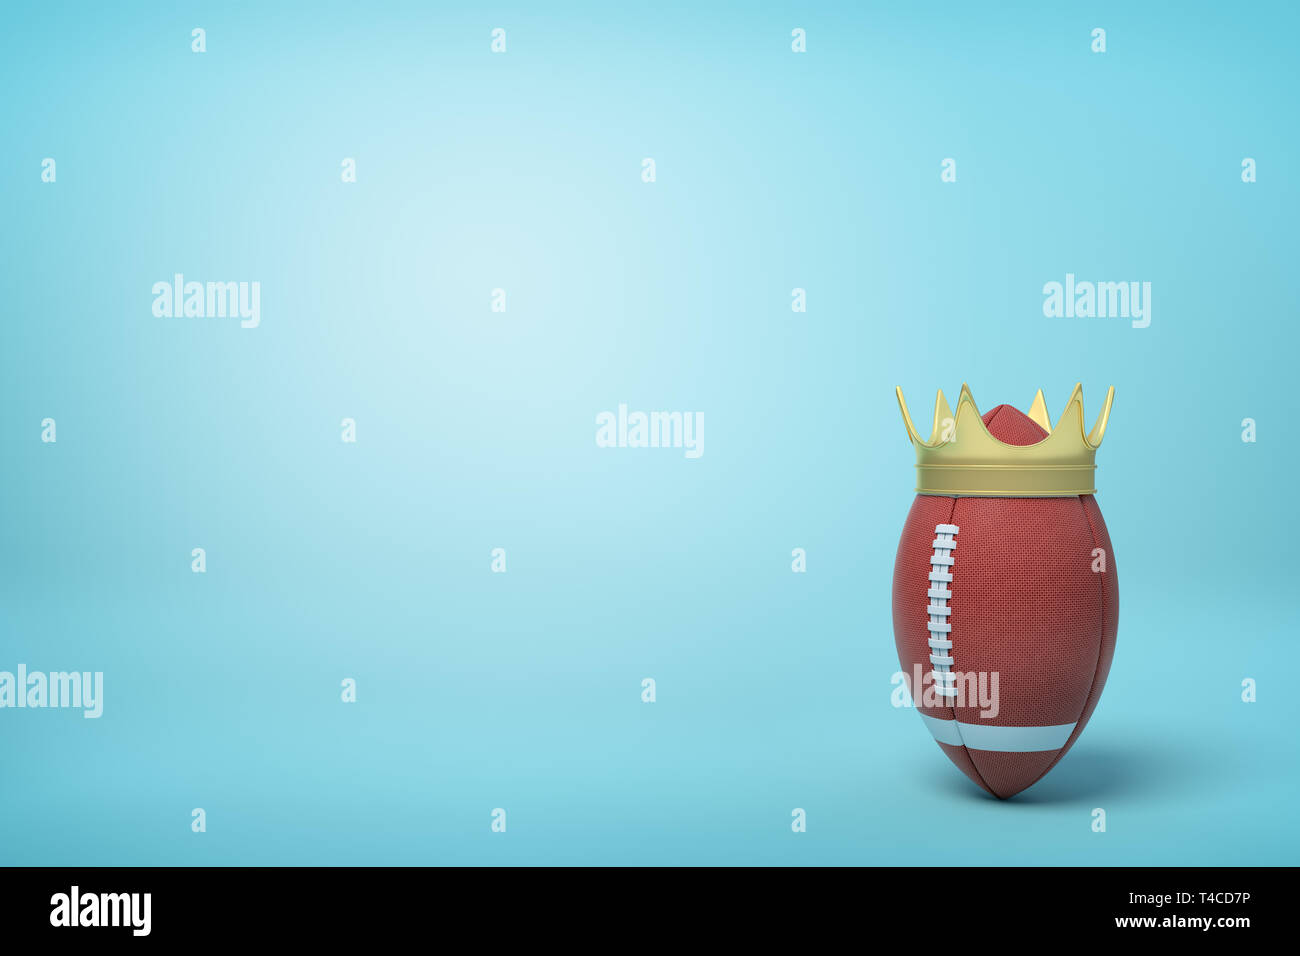 3d rendering of brown ball for American football standing upright and wearing golden crown on light blue background. Stock Photo